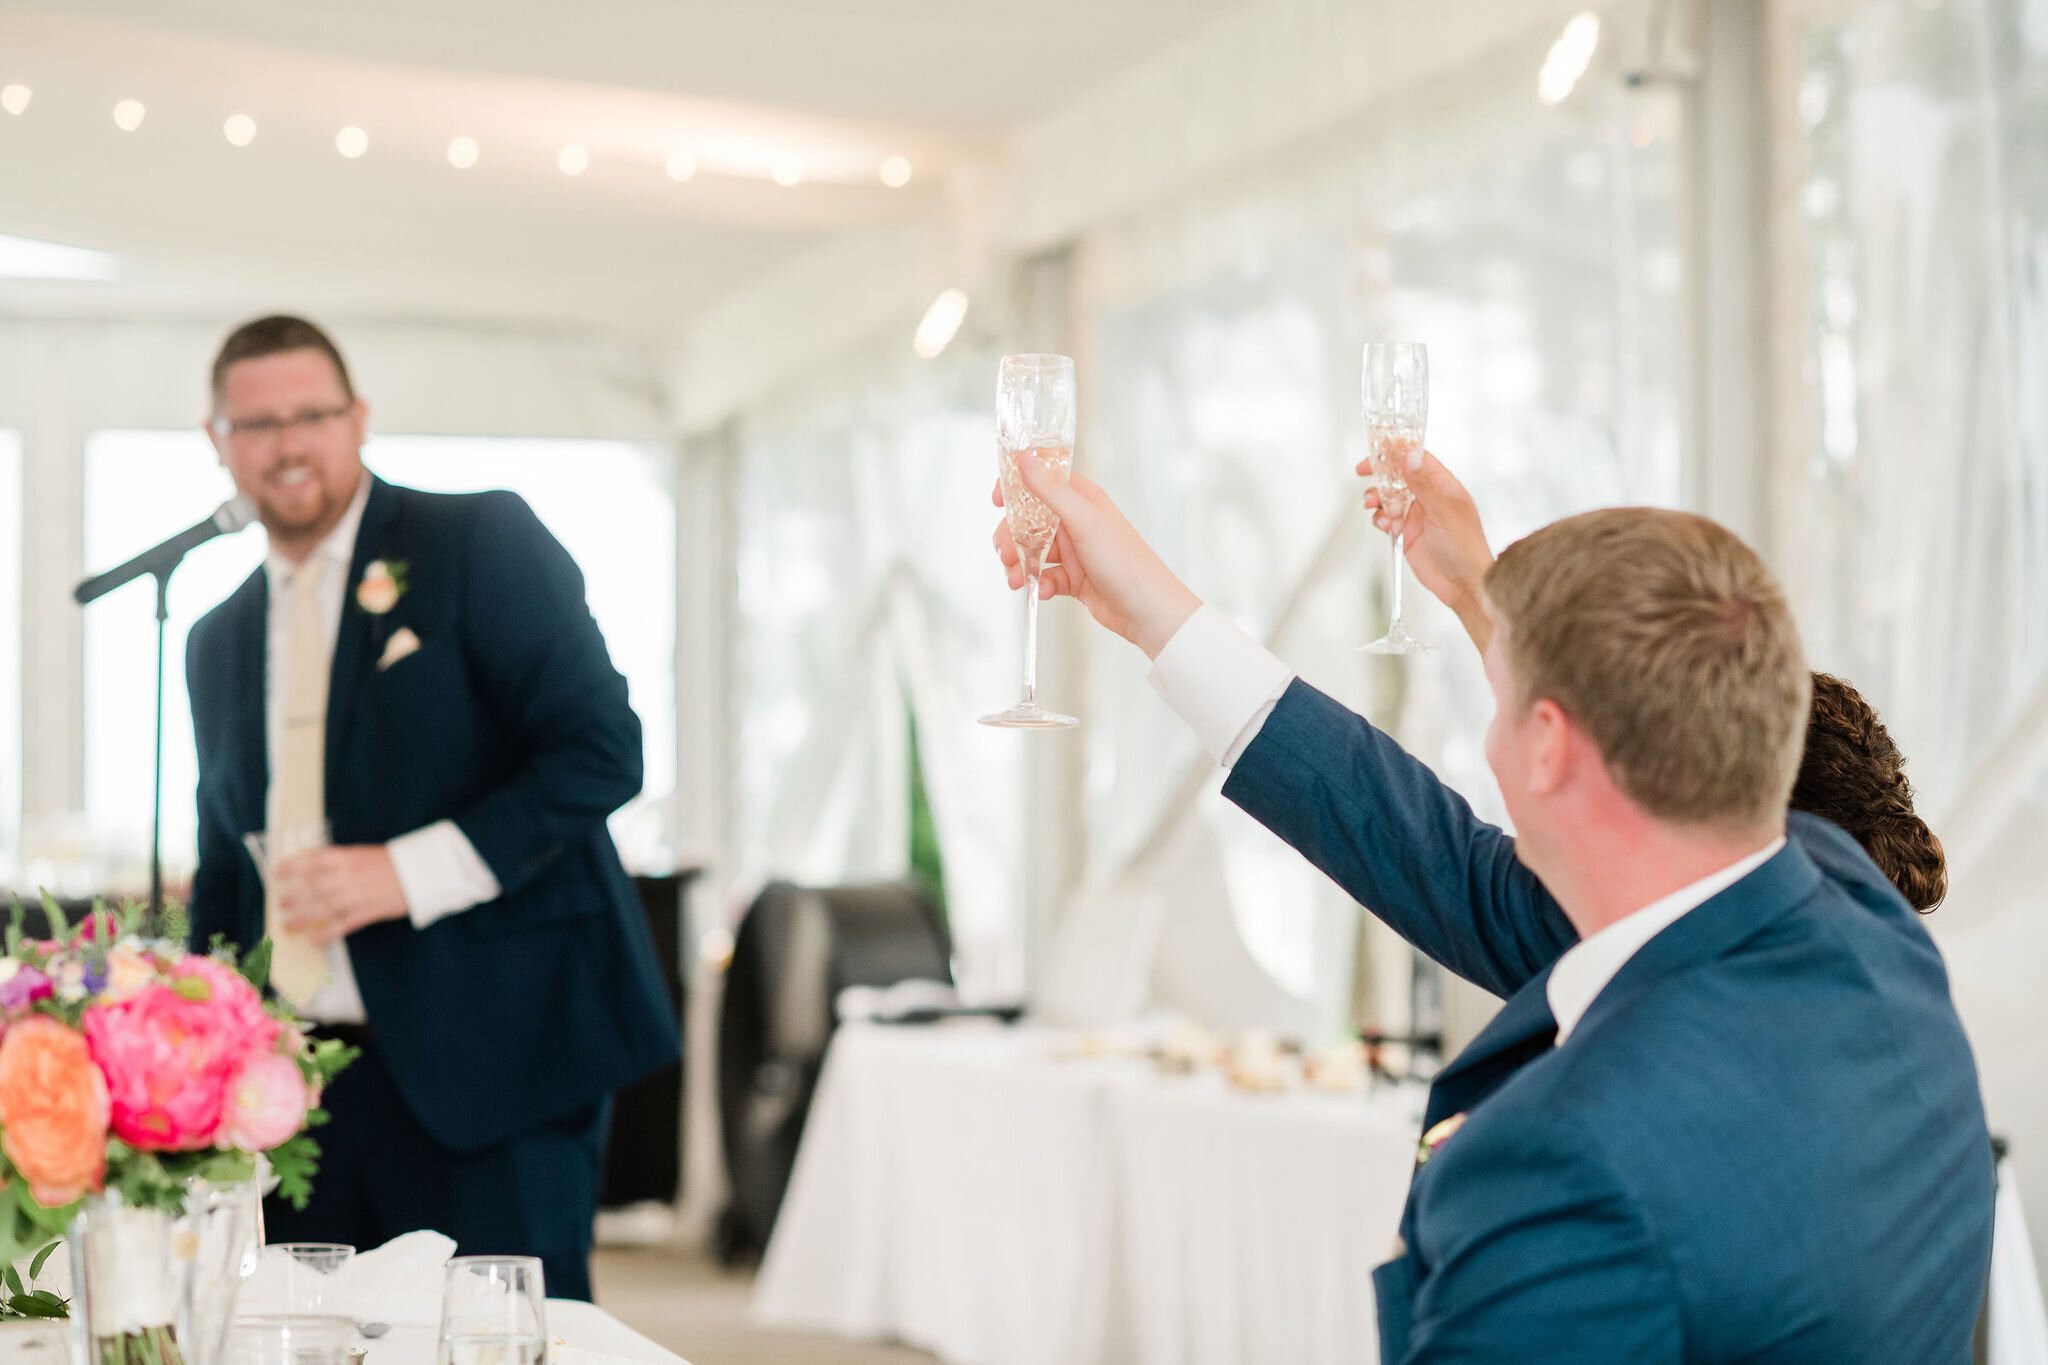 Bride and groom raise up their glasses for a toast